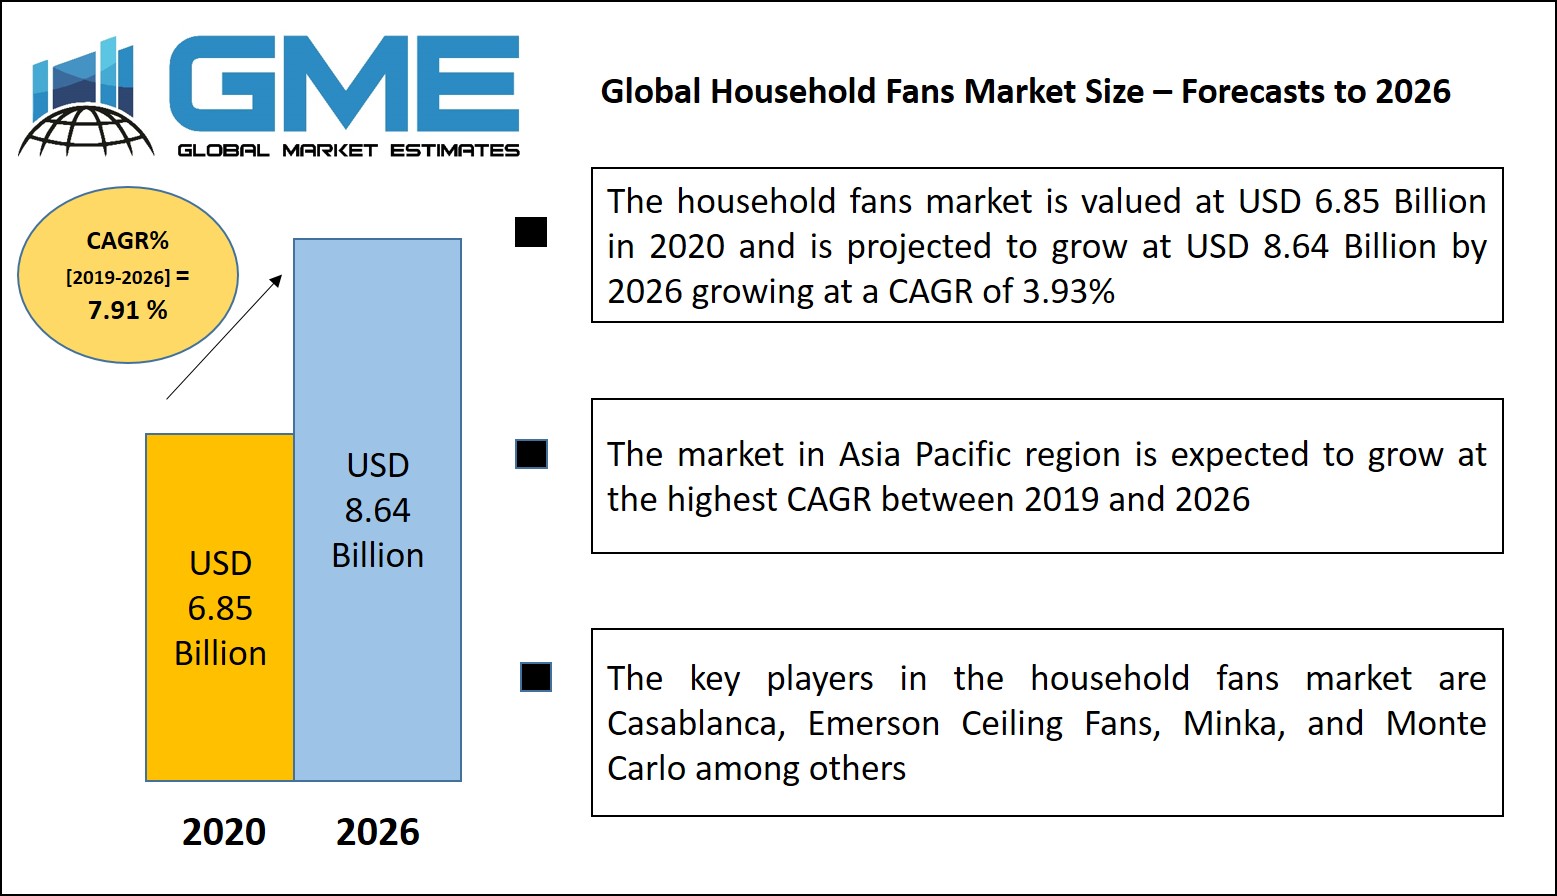 Global Household Fans Market Size – Forecasts to 2026